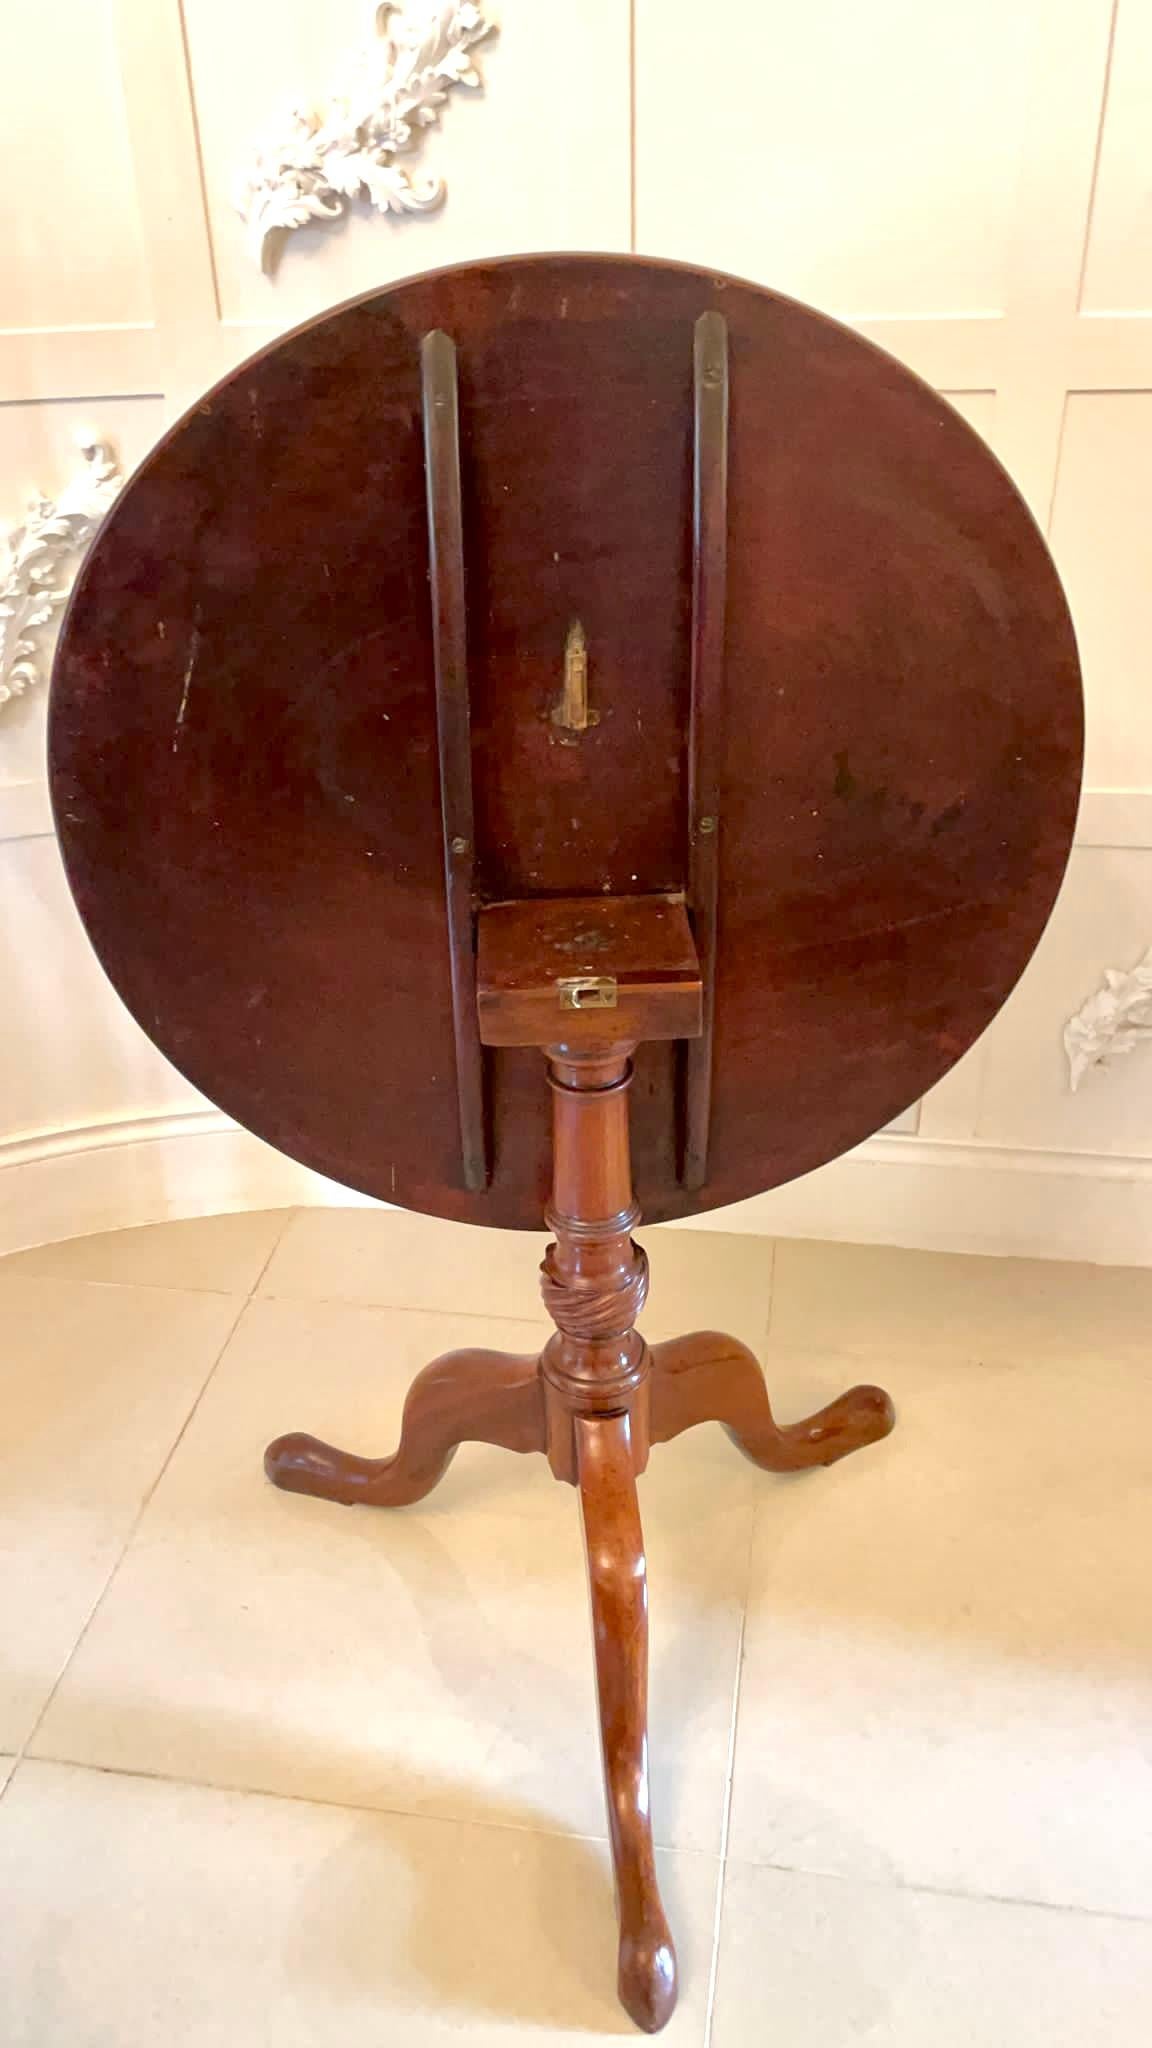 Quality antique George III mahogany circular tilt top centre table having a quality circular mahogany tilt top standing on a pedestal column with turned and twist carving raised on three shaped cabriole legs with pad feet.
 

Measures: H 73.5cm